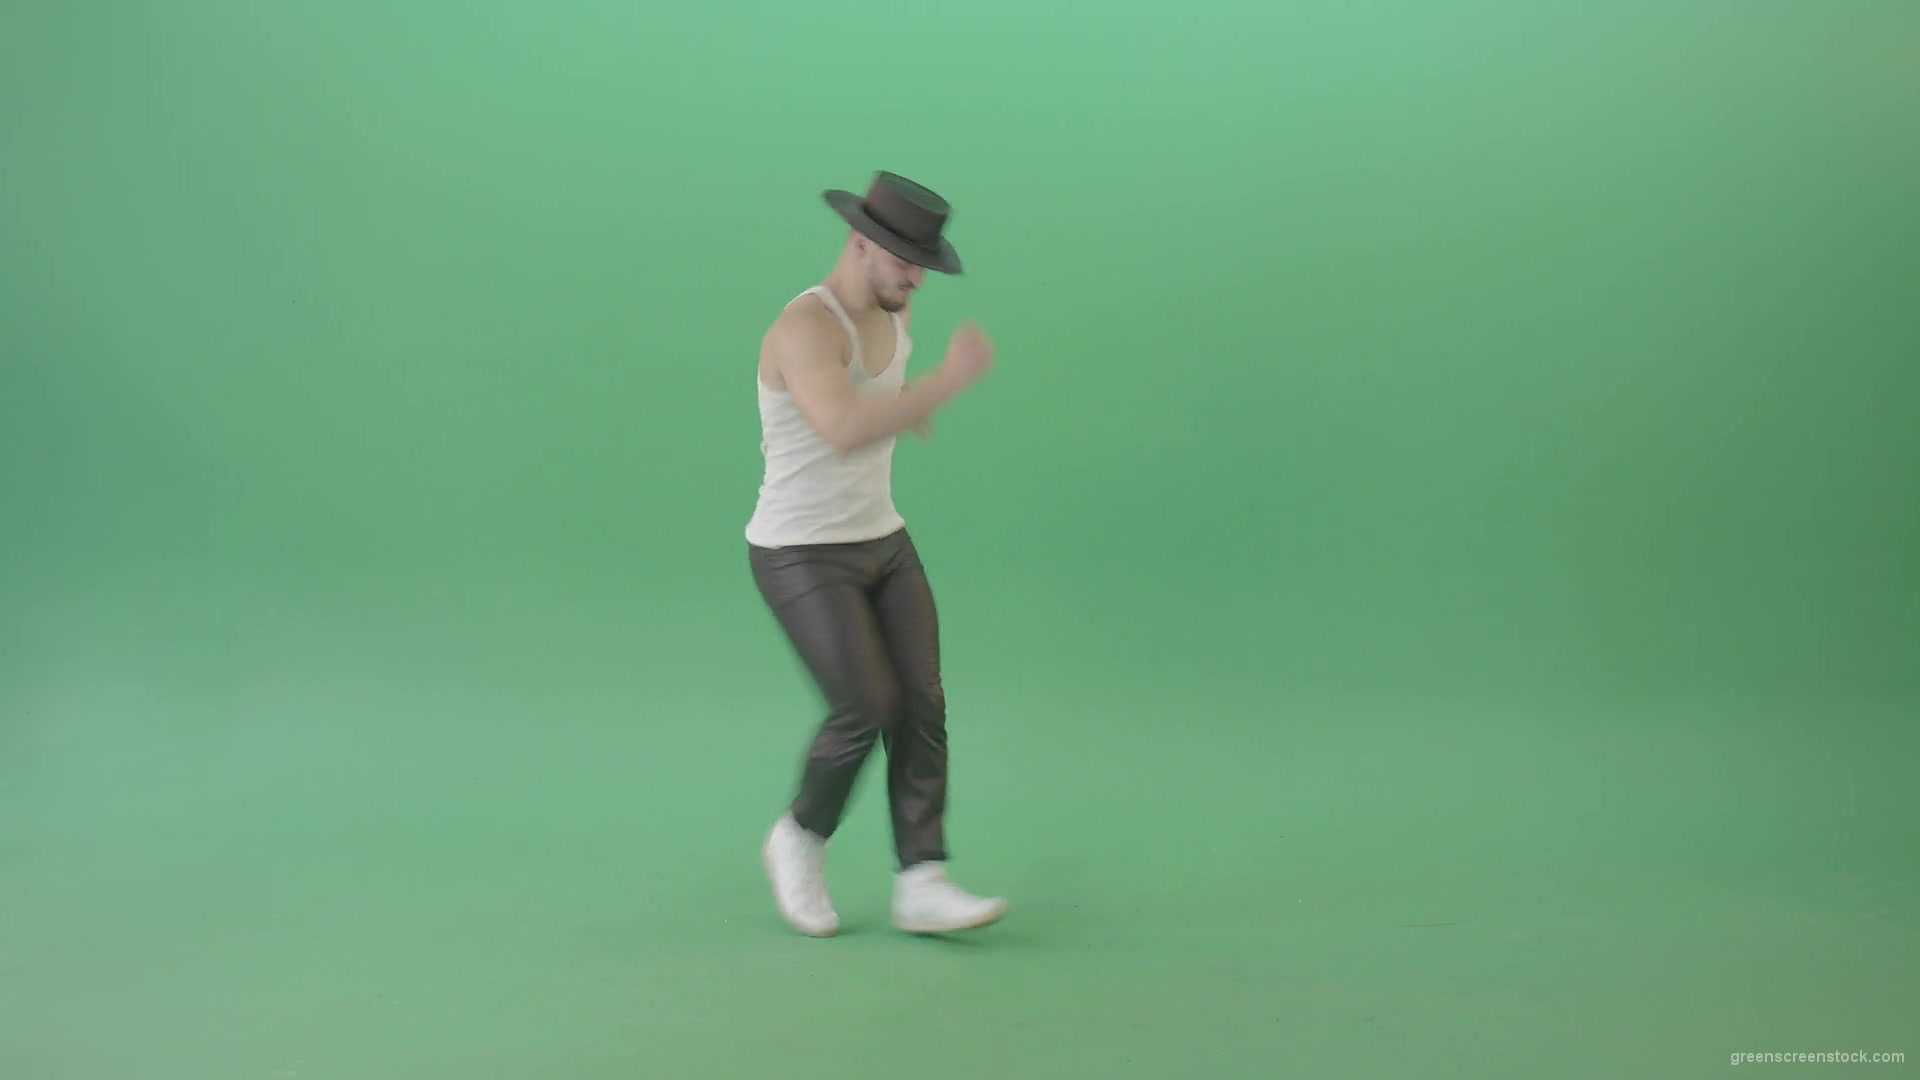 Adult-Man-makes-moonwalk-and-dancing-Pop-isolated-on-Green-Screen-4K-Video-Footage-1920_005 Green Screen Stock